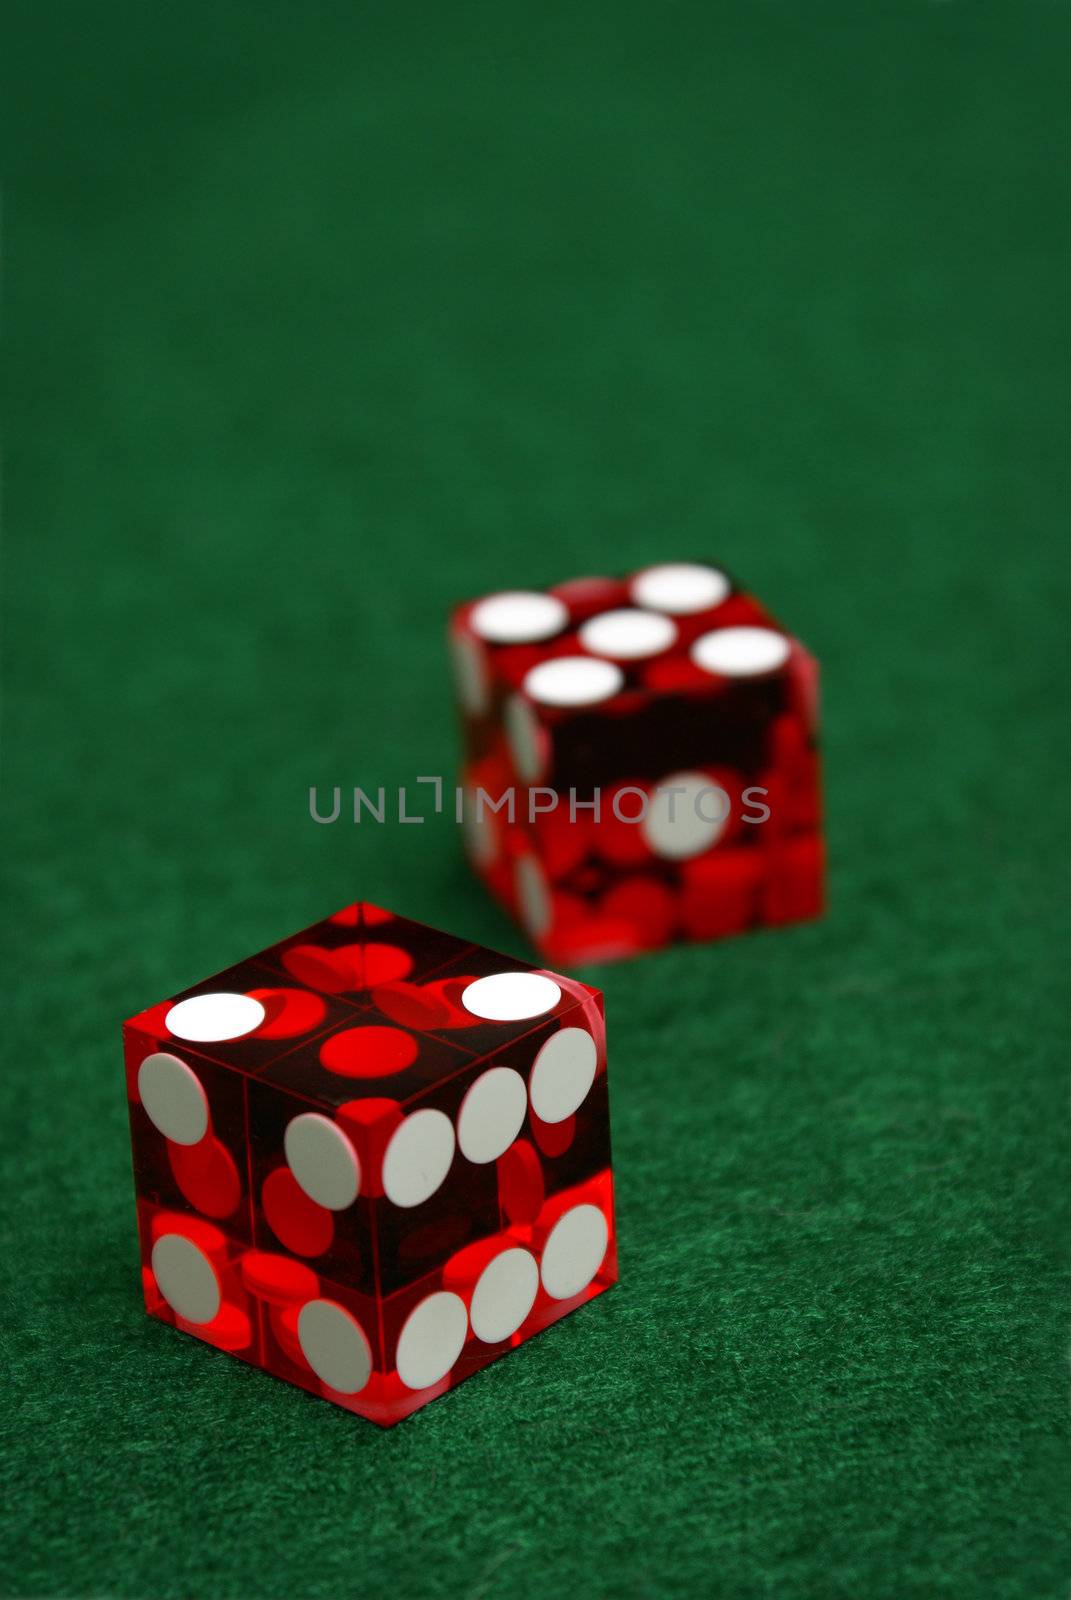 A pair of casino quality red dice lie on a green felt table with the number seven rolled.